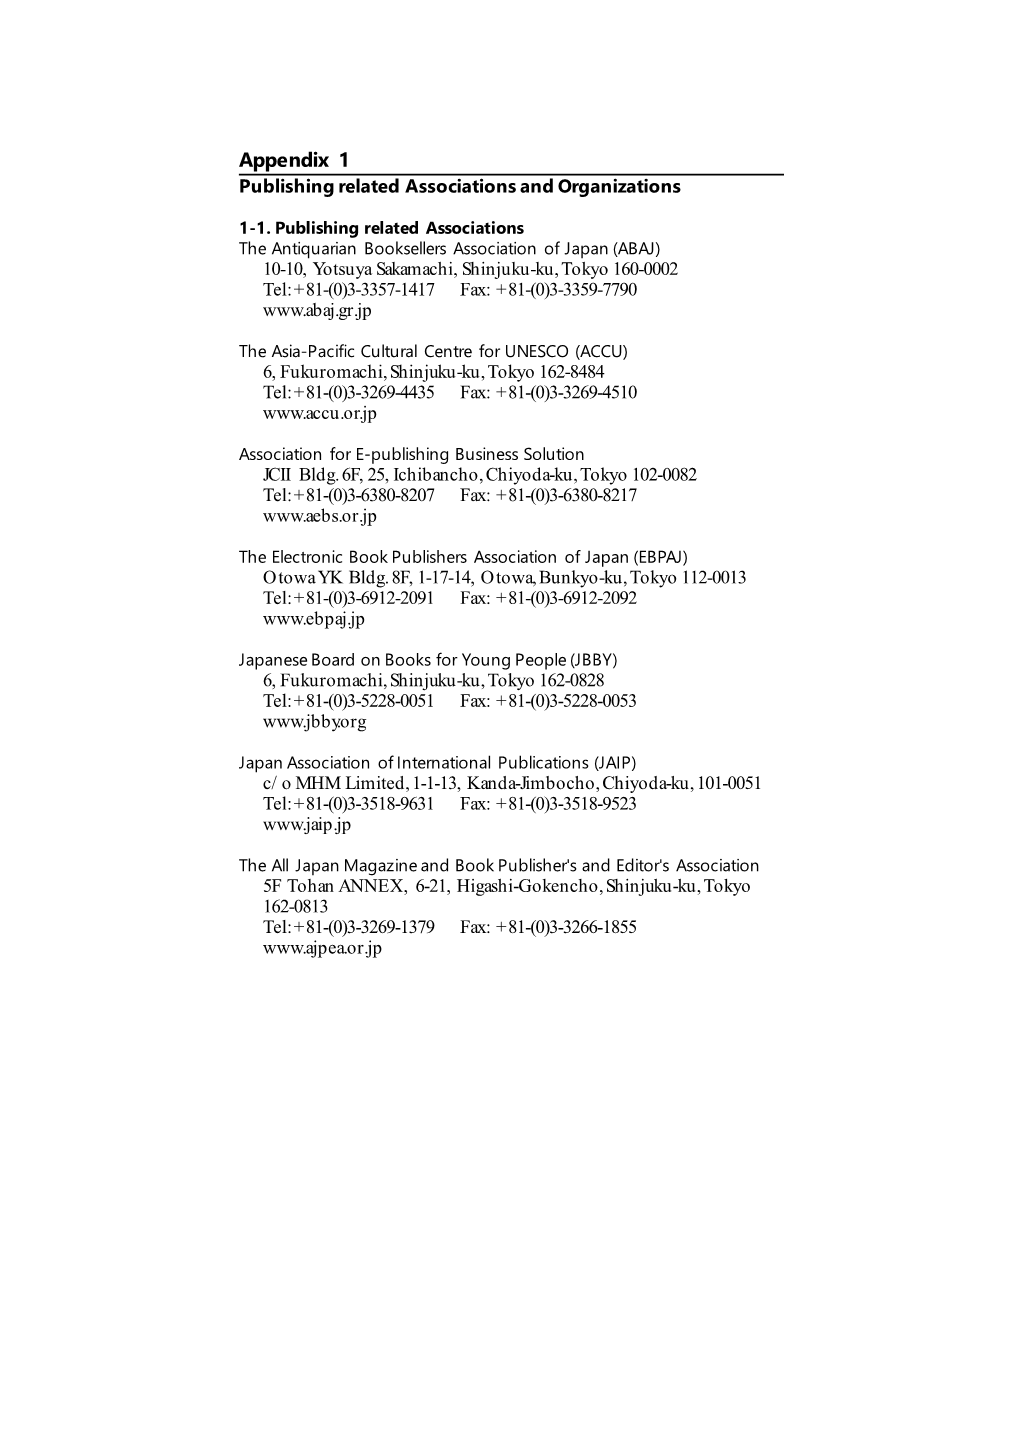 Appendix 1 Publishing Related Associations and Organizations